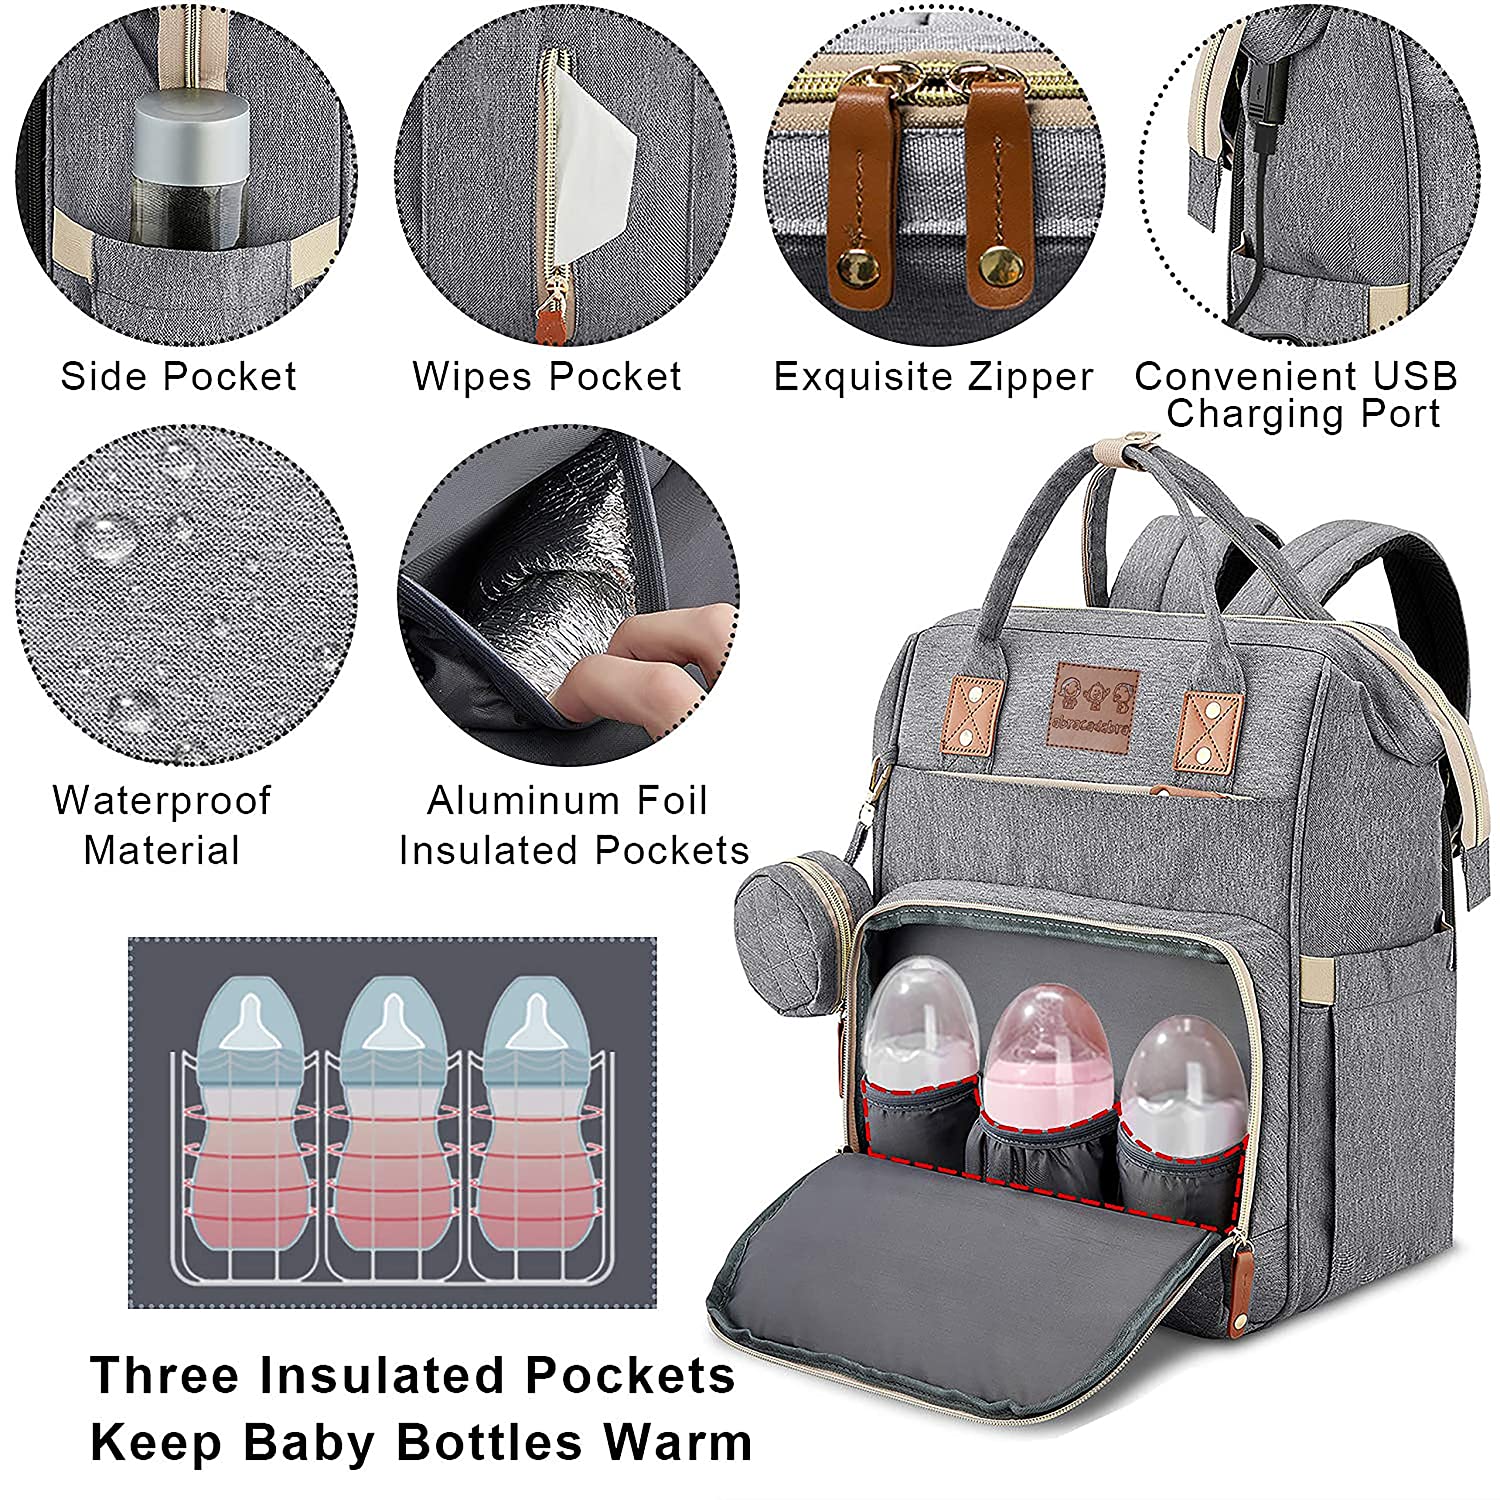 Abracadabra Diaper Bag With Changing Station - Grey